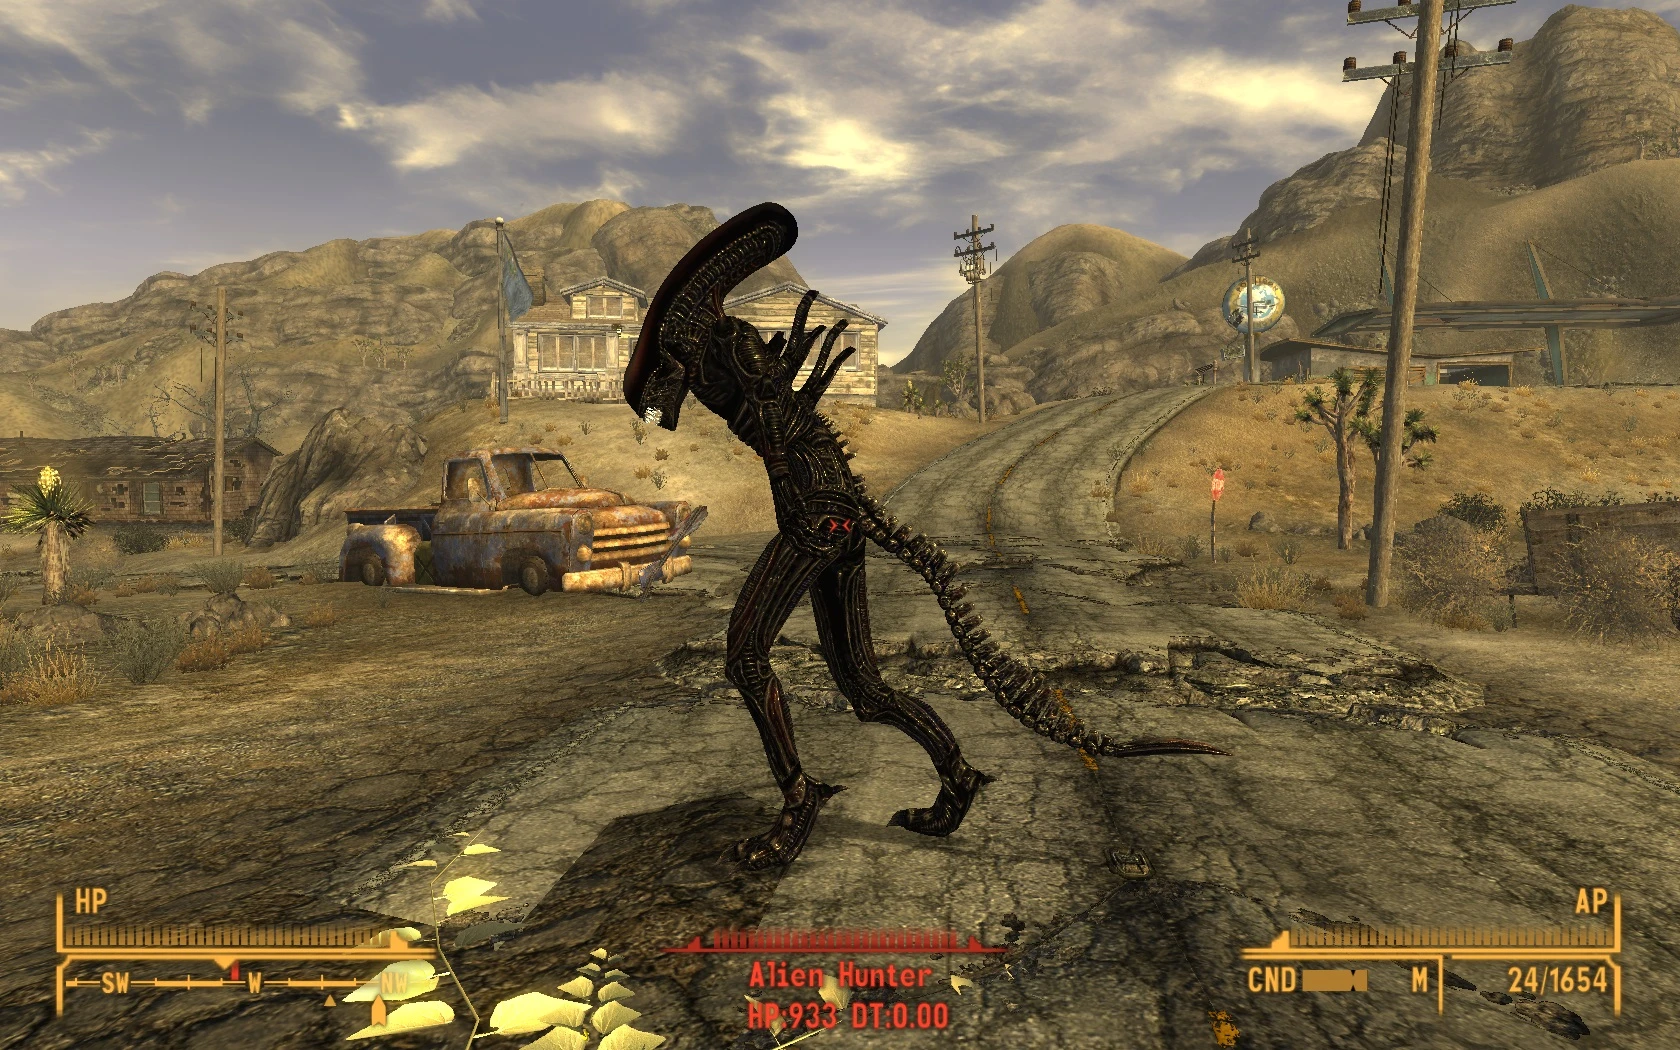 Bug Hunt at Fallout New Vegas mods and community. 